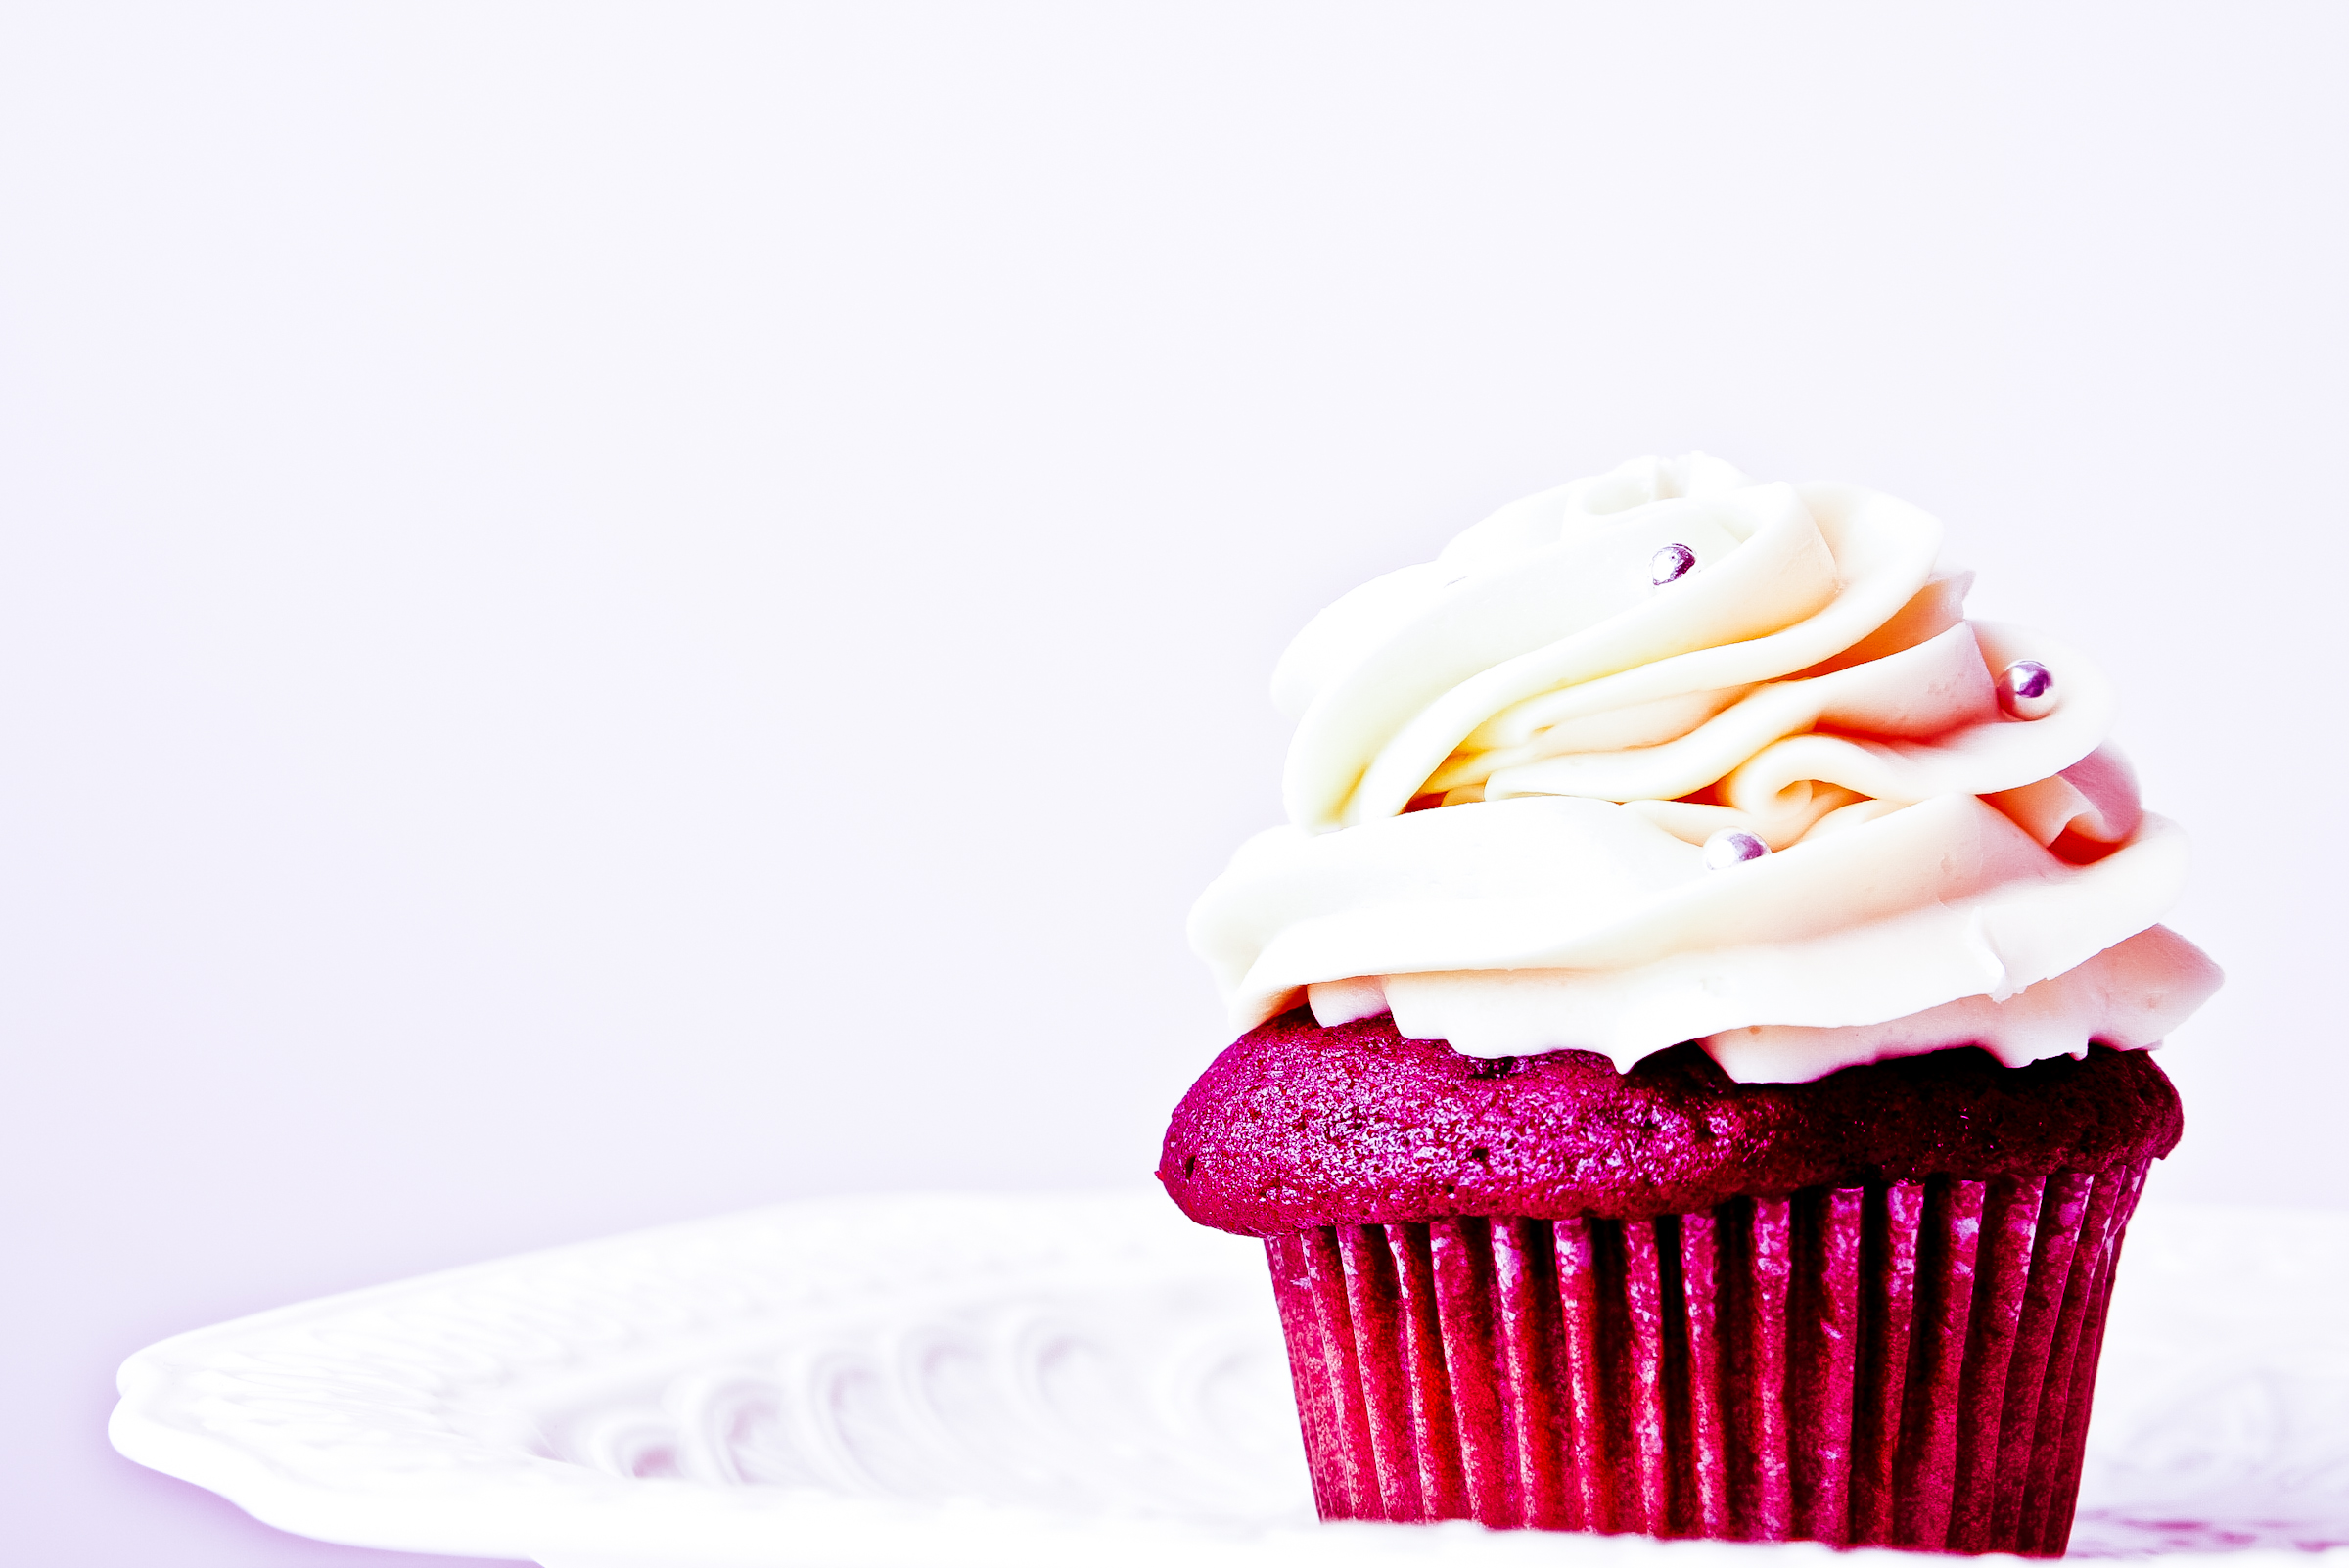 Real Cupcake Background Pix For Web